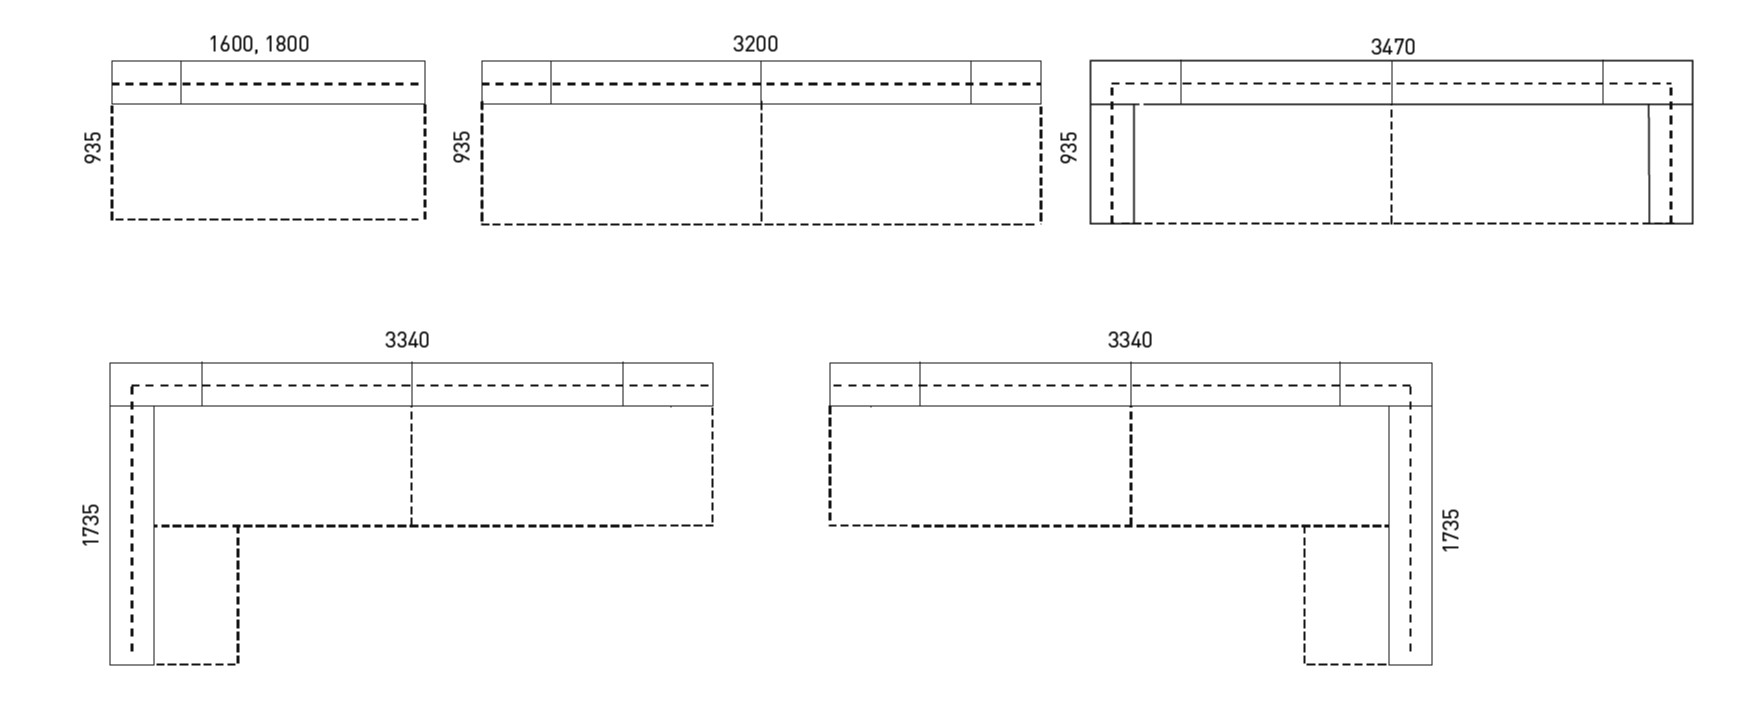 Illustration showing dimensions of all 5 Nova reception counter configurations